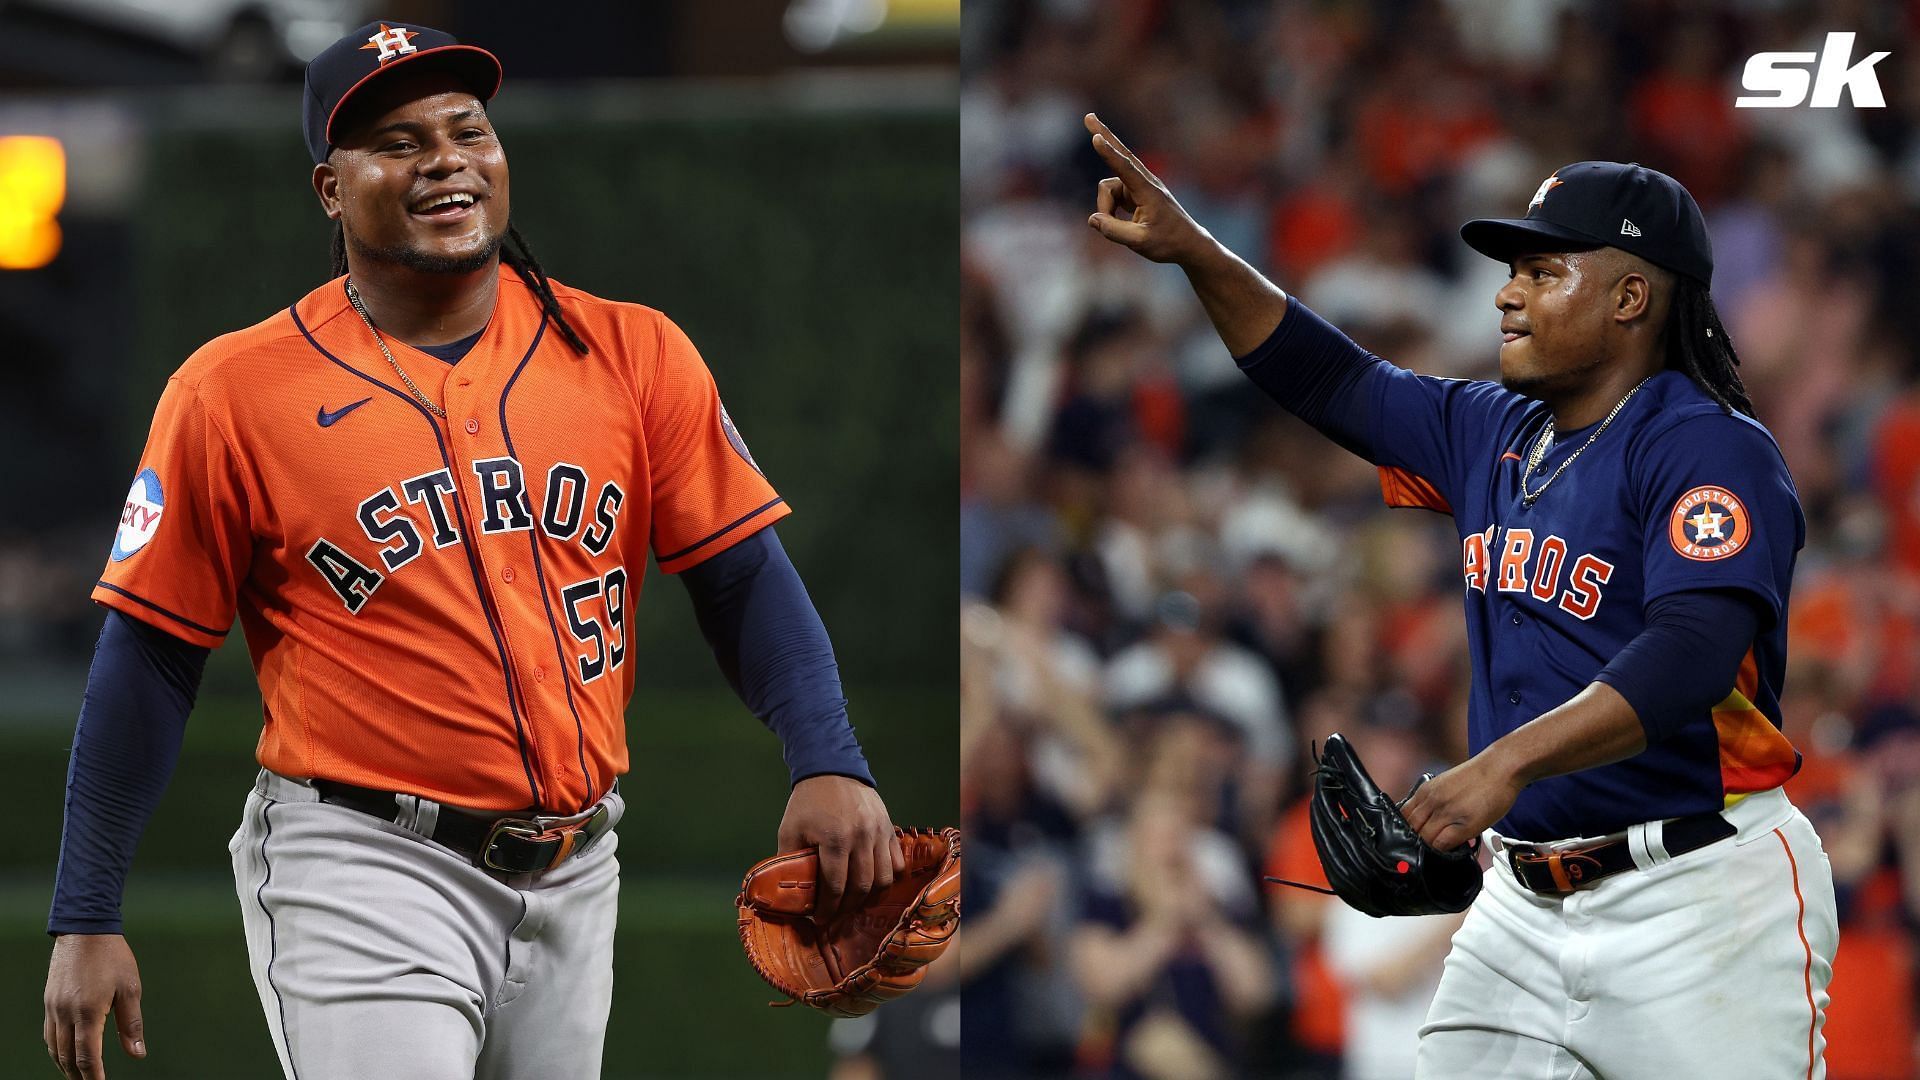 Astros pitcher Framber Valdez has apparently been checked in on by potential suitors